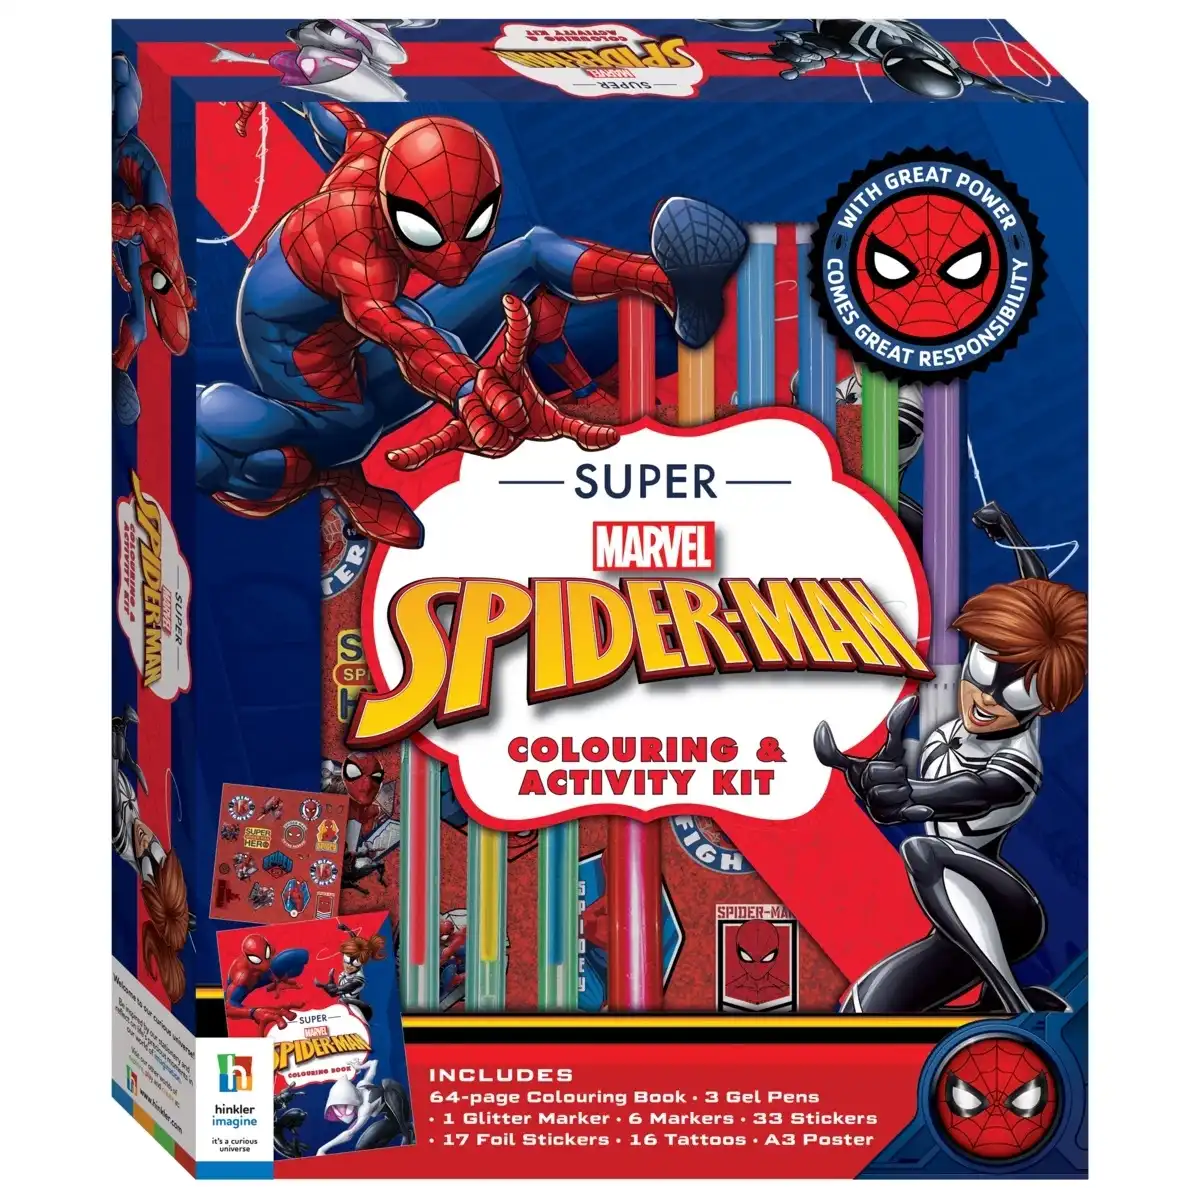 Super Marvel Spider-Man Colouring and Activity Kit